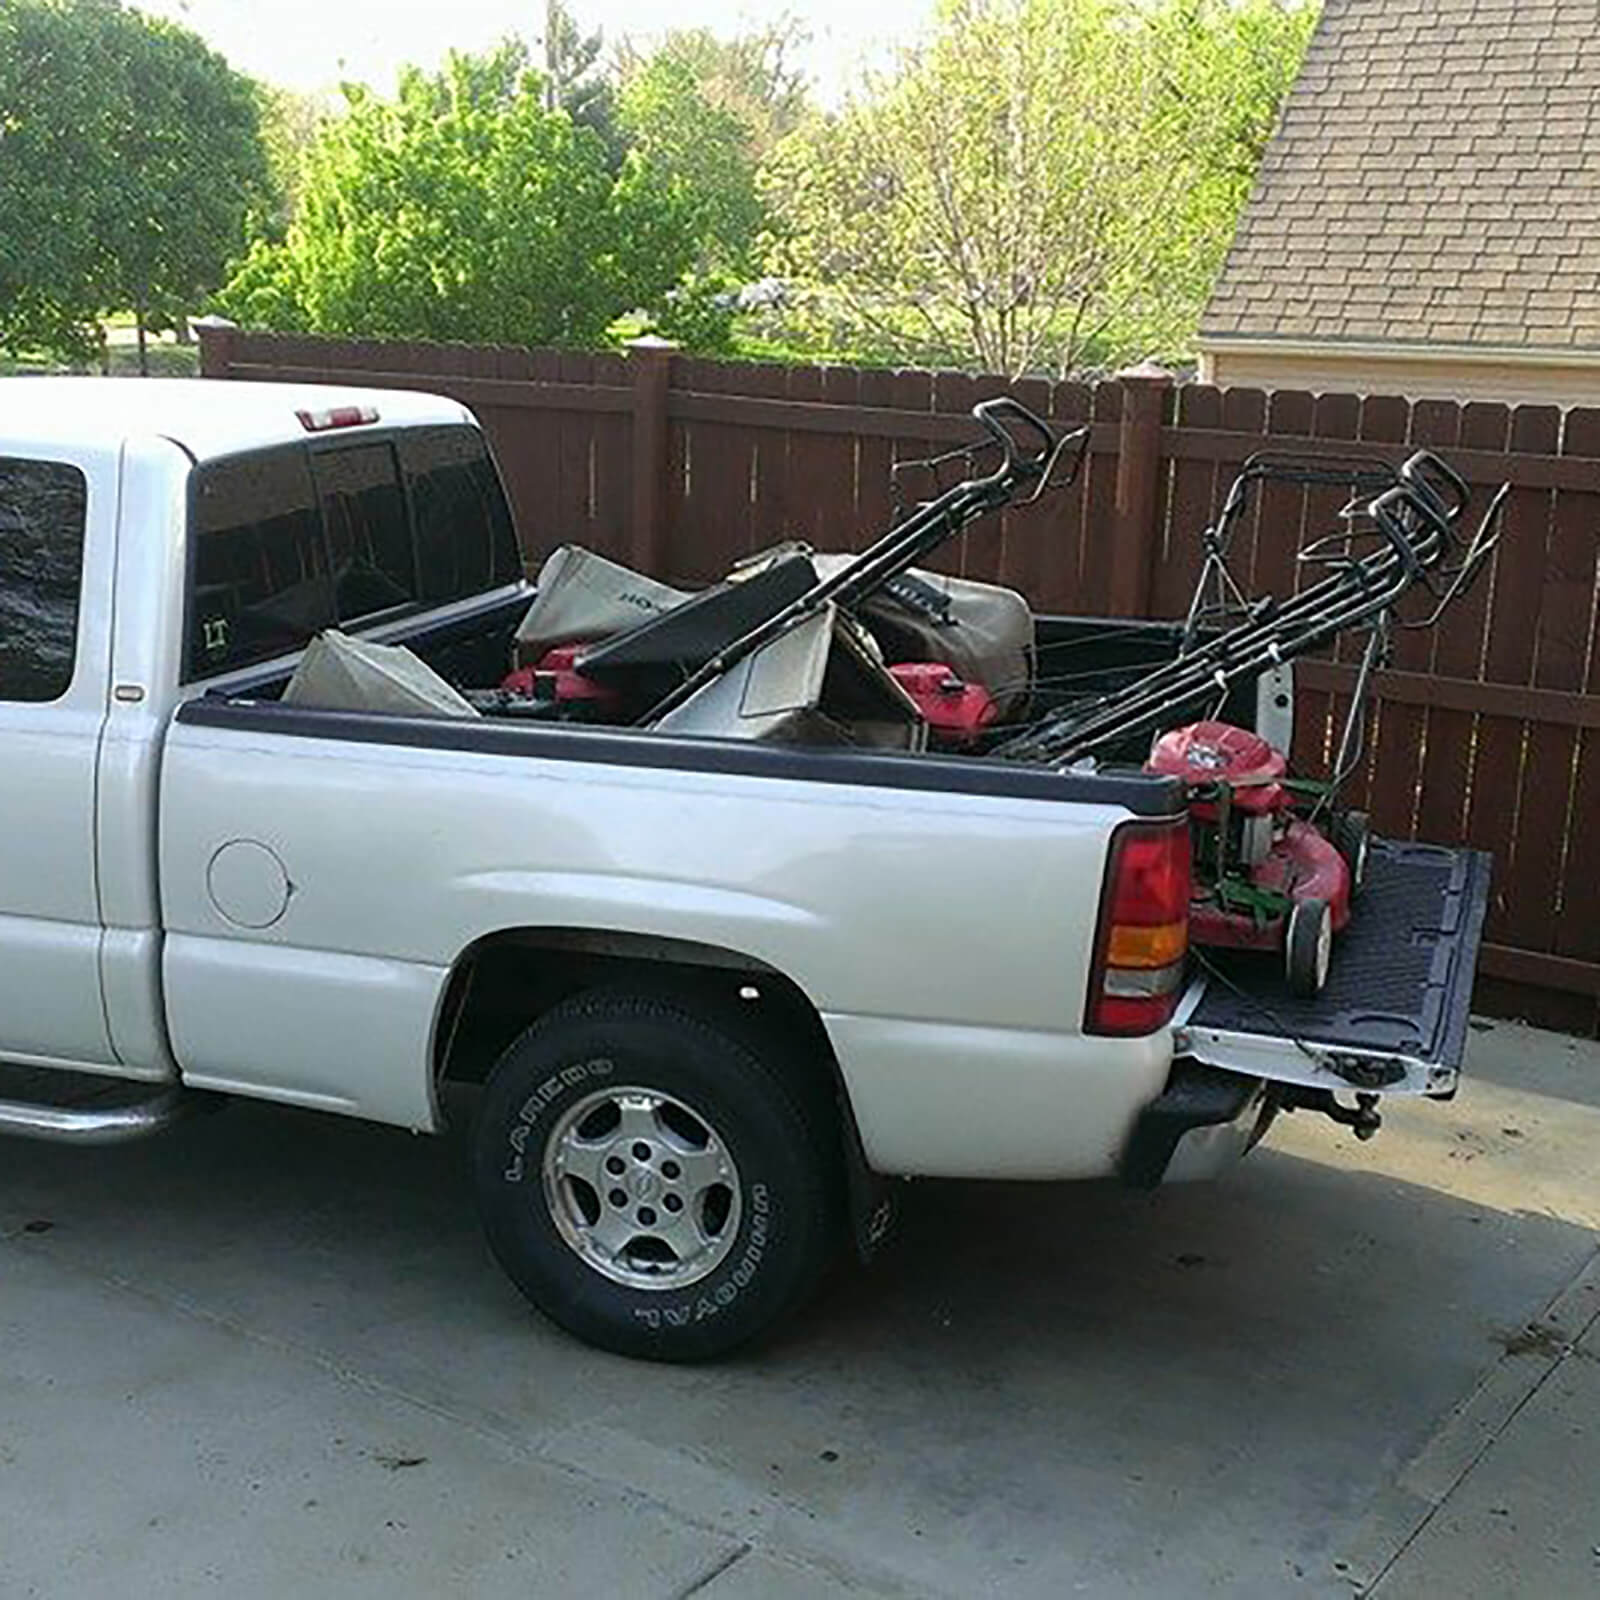 Pickup truck with lawnmowers in back